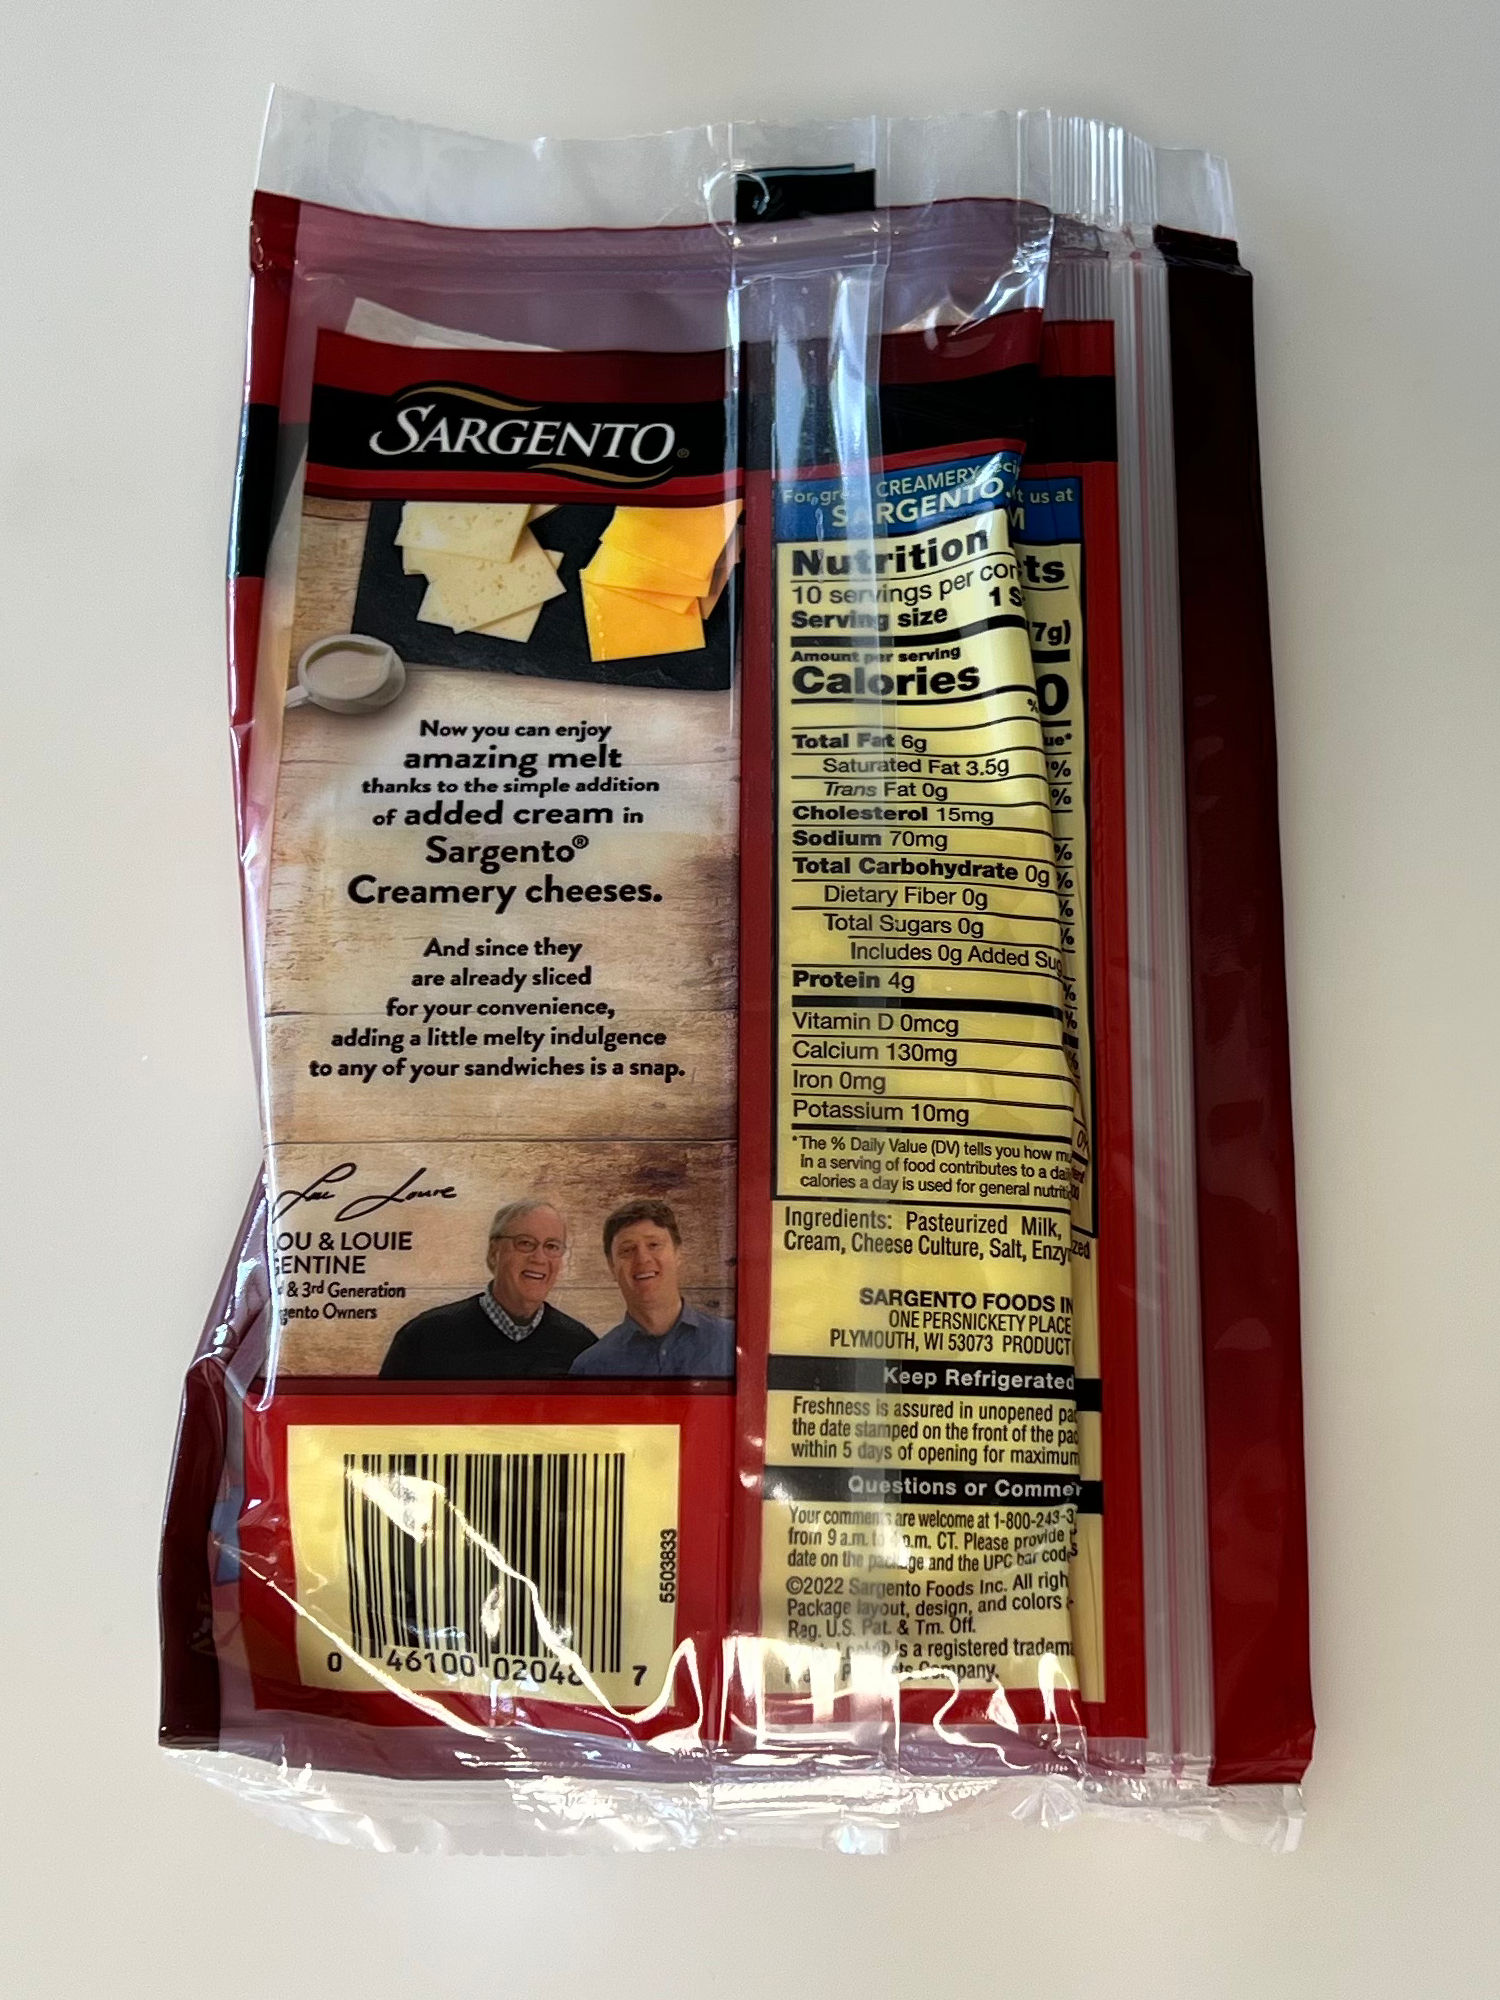 Baby Swiss Sargento Nutrition Facts